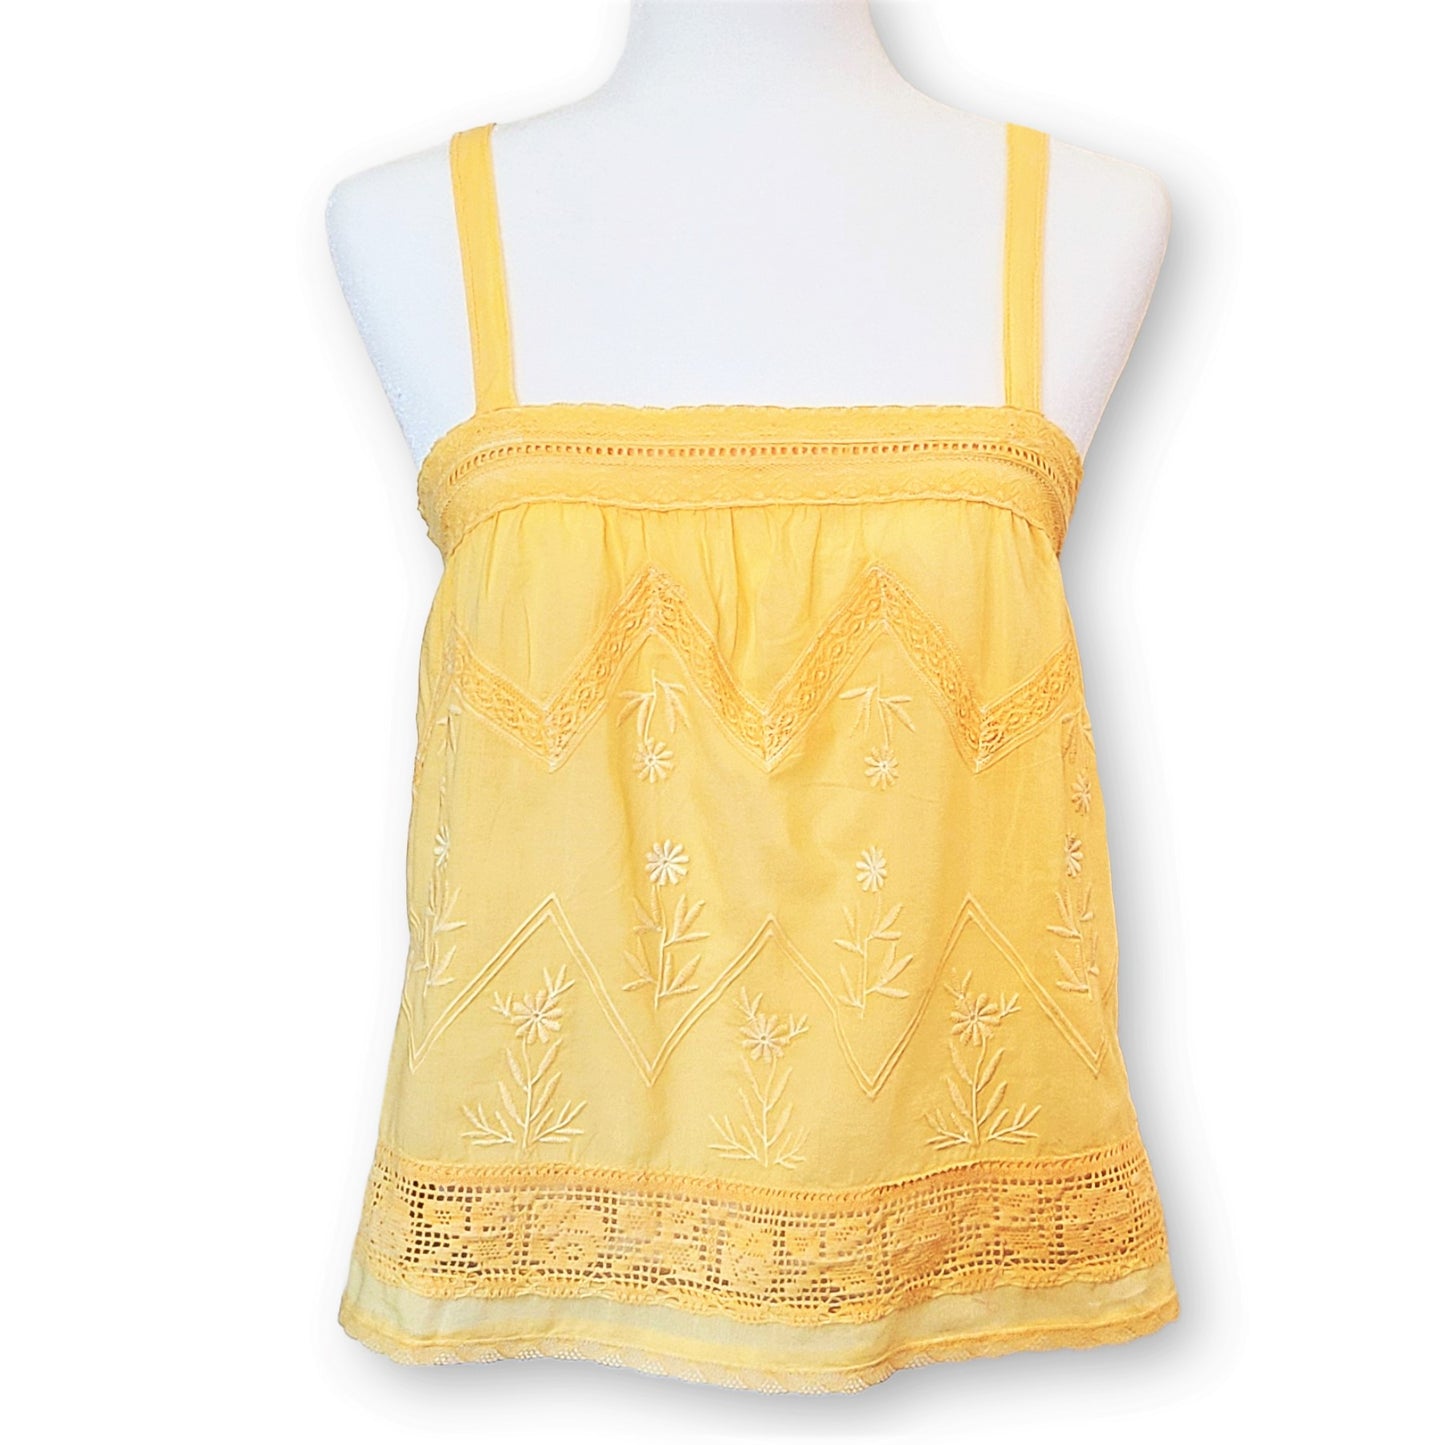 Lucky Brand Embroidery Lace Cotton Camisole Top